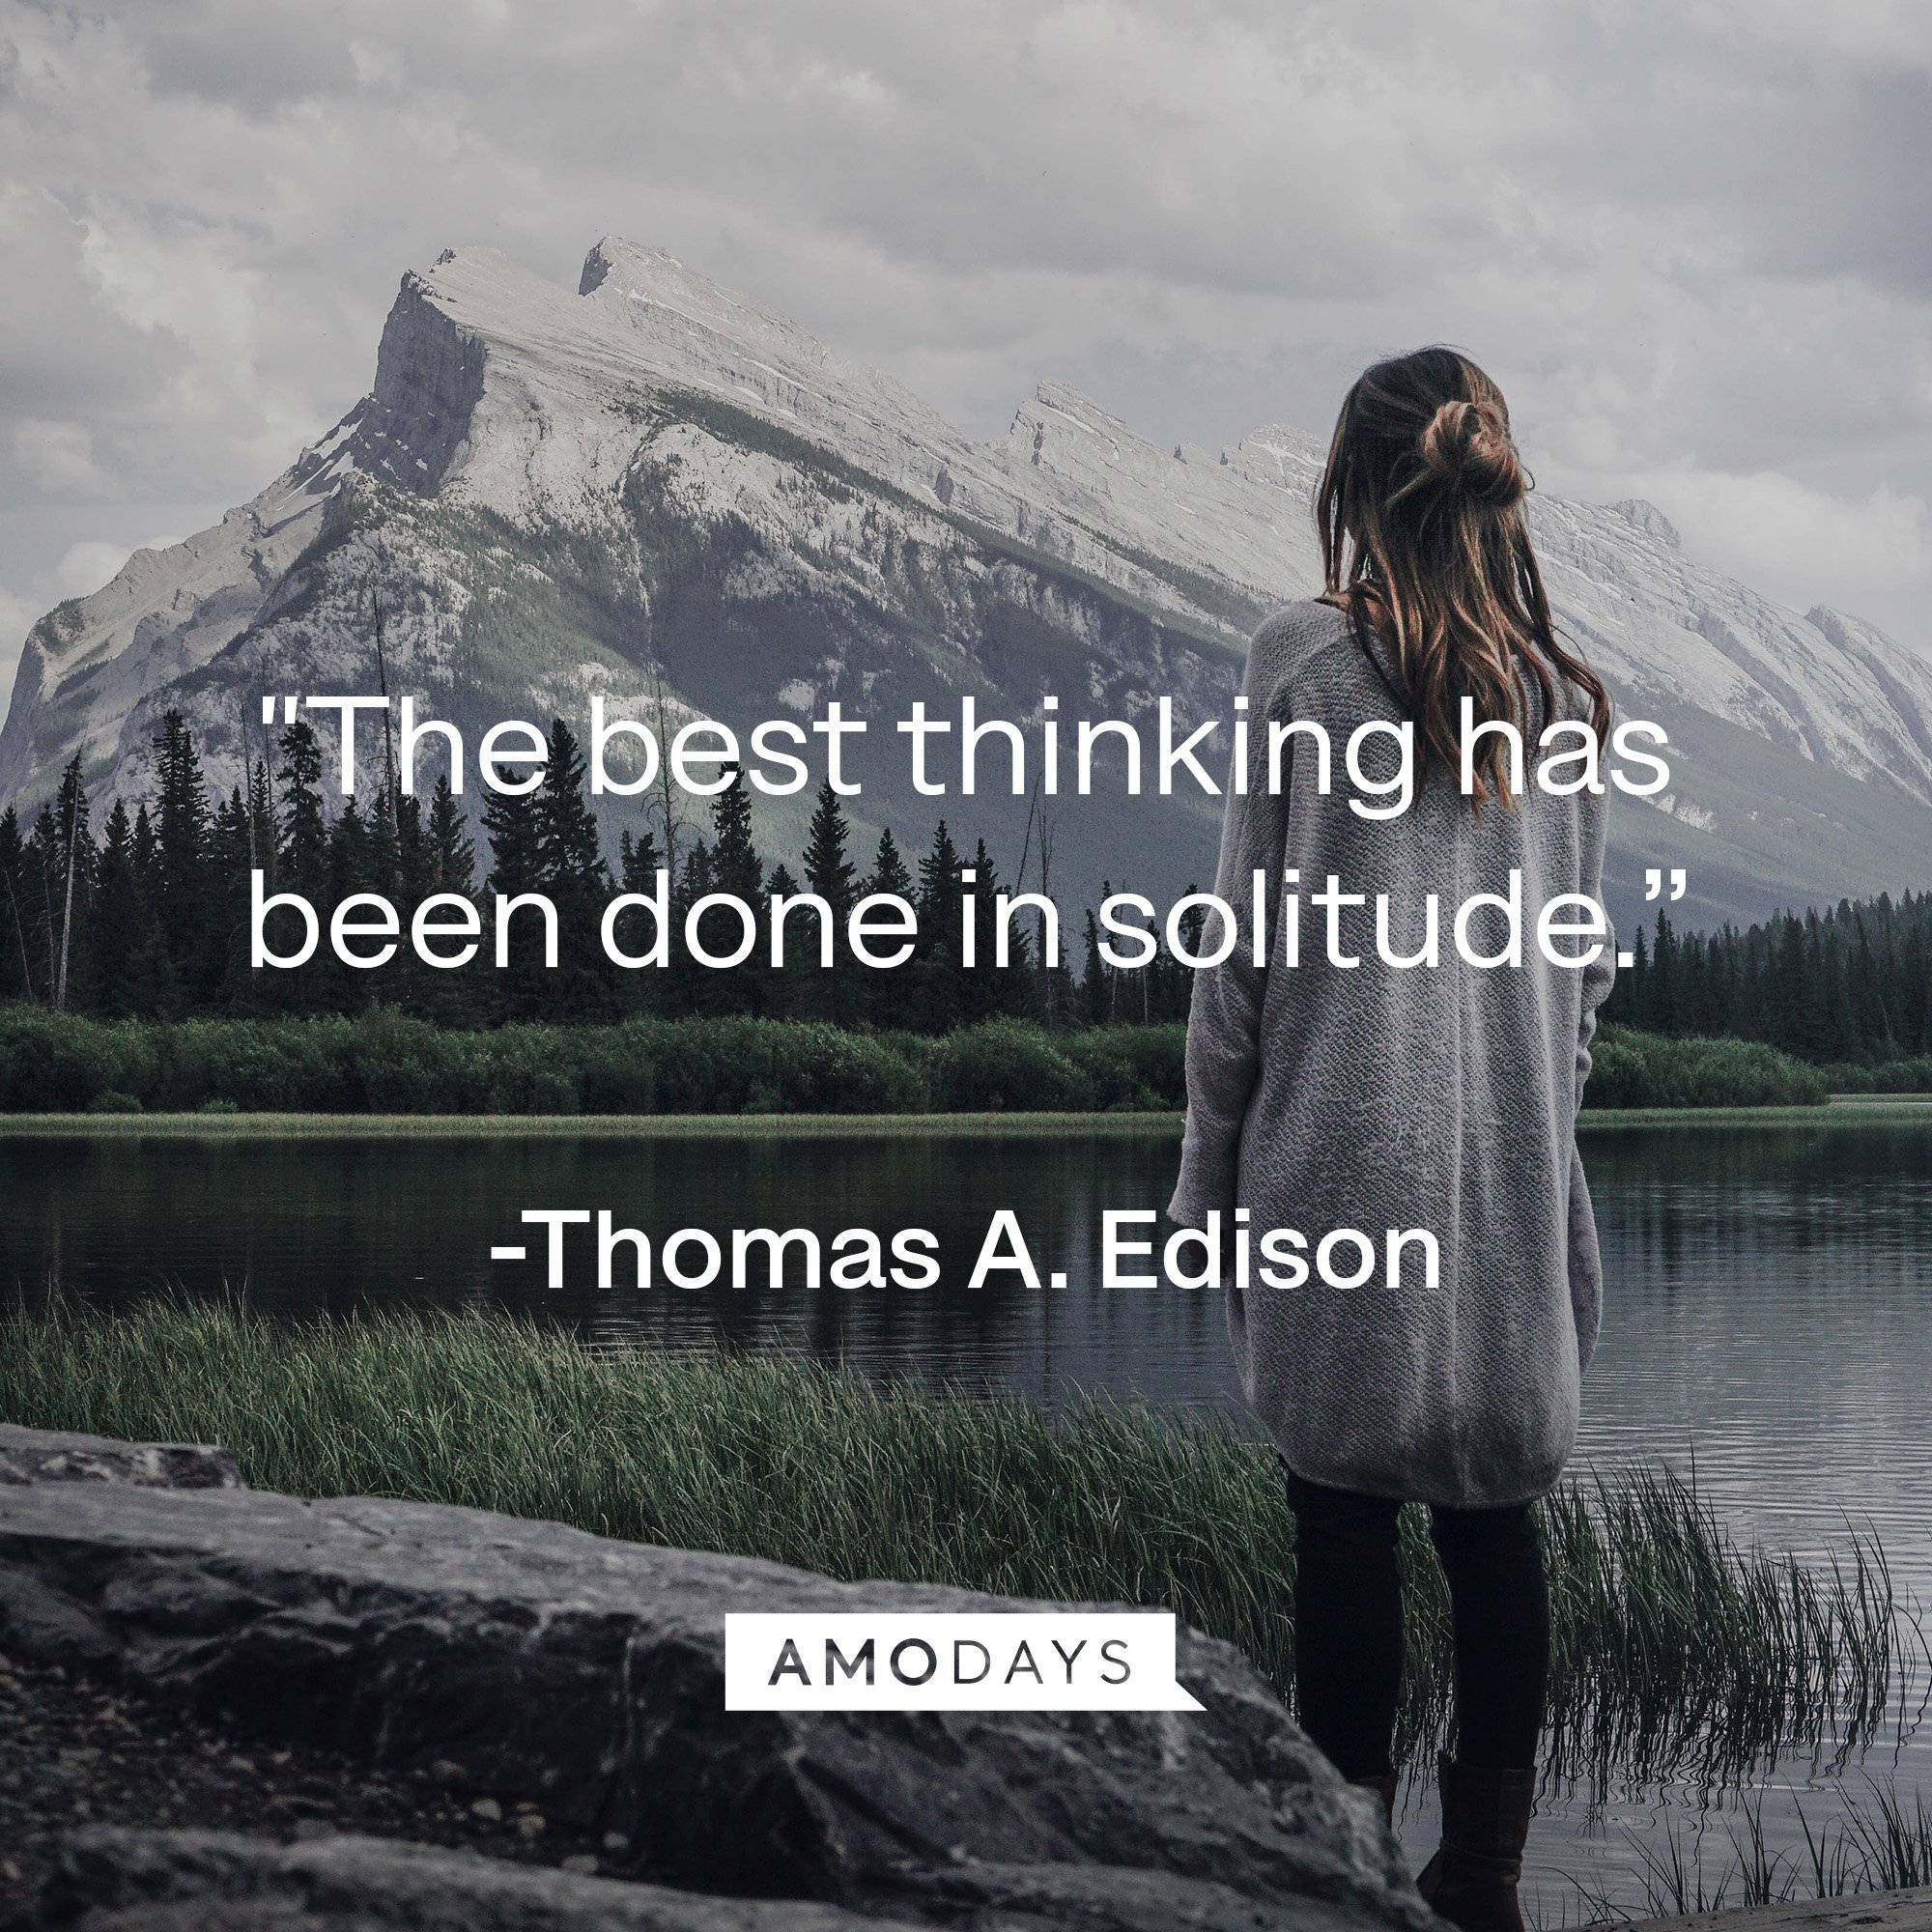 Thomas Edison’s quote: “The best thinking has been done in solitude.” | Image: Amodays